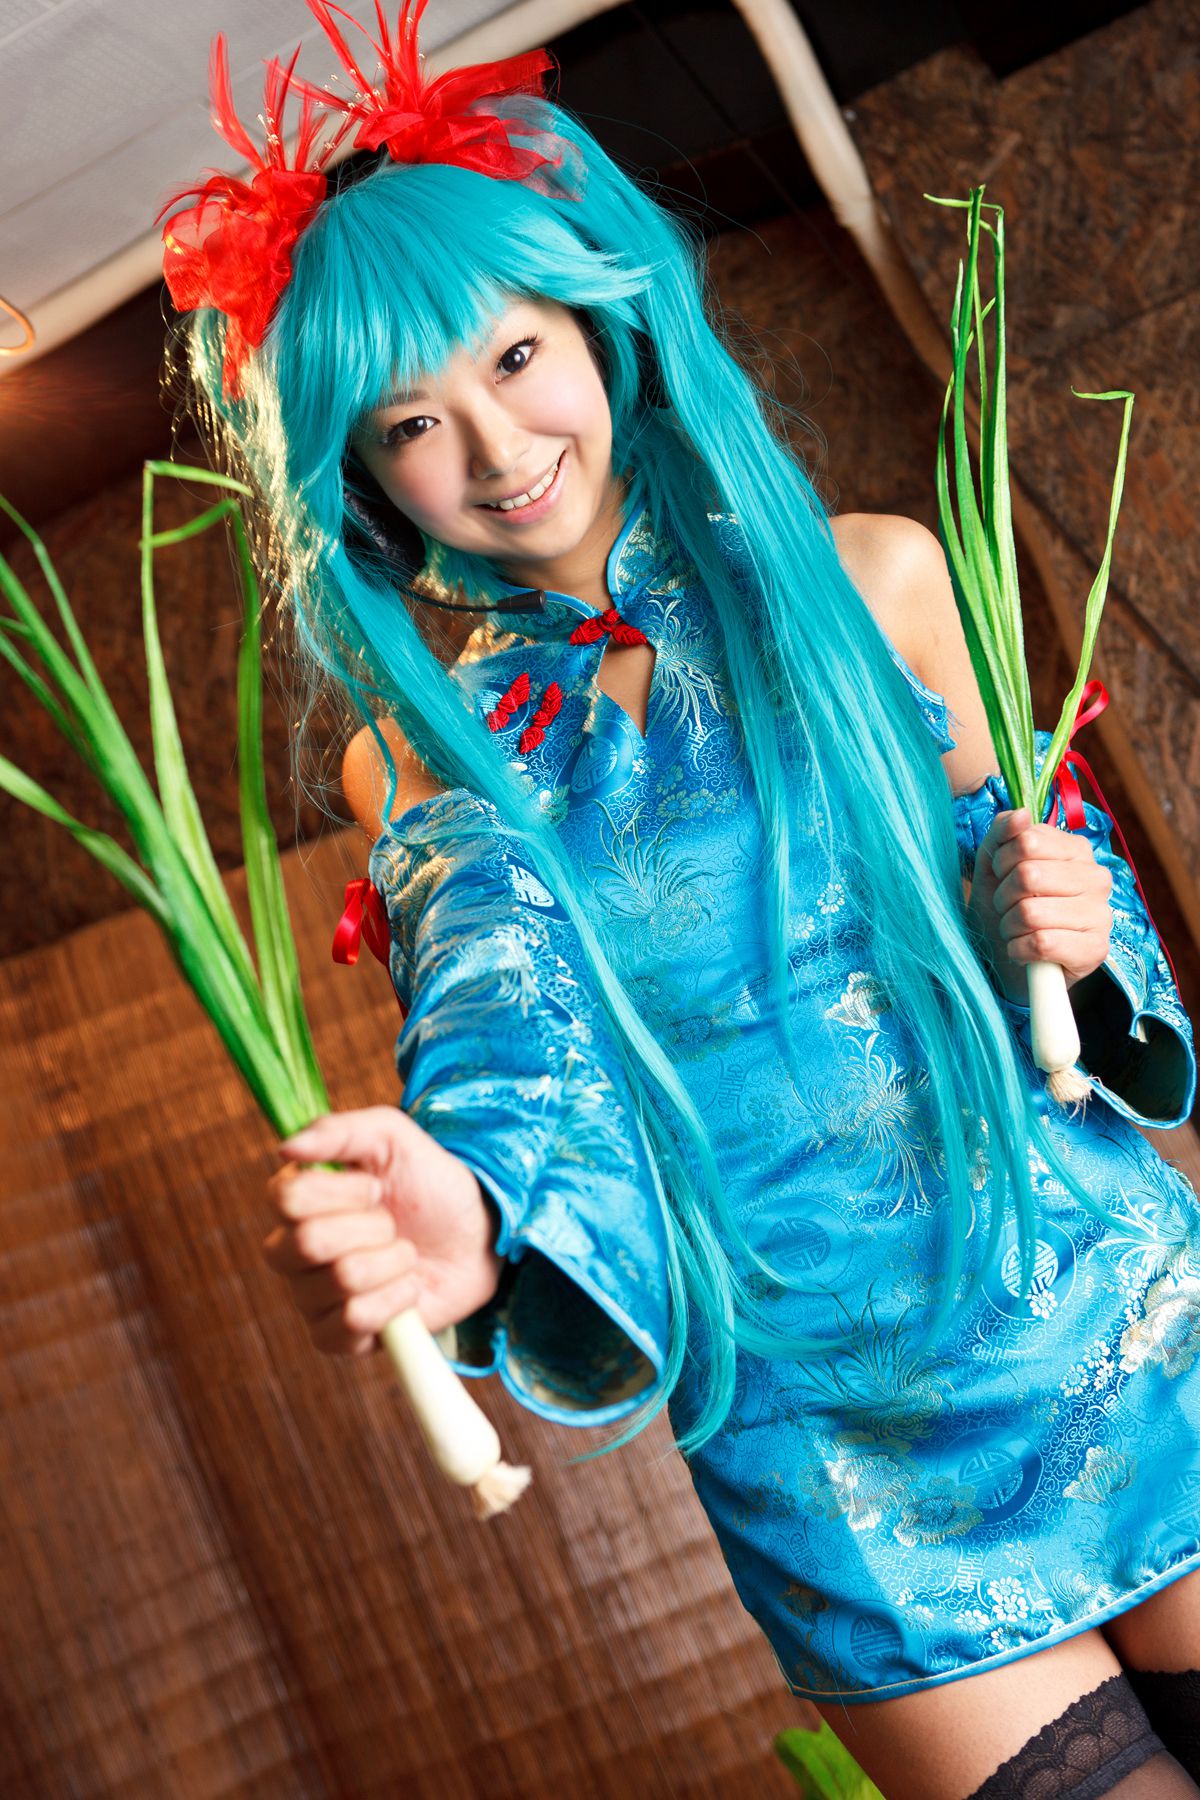 taotuhome[Cosplay] Necoco as Hatsune Miku from Vocaloid 套图第43张